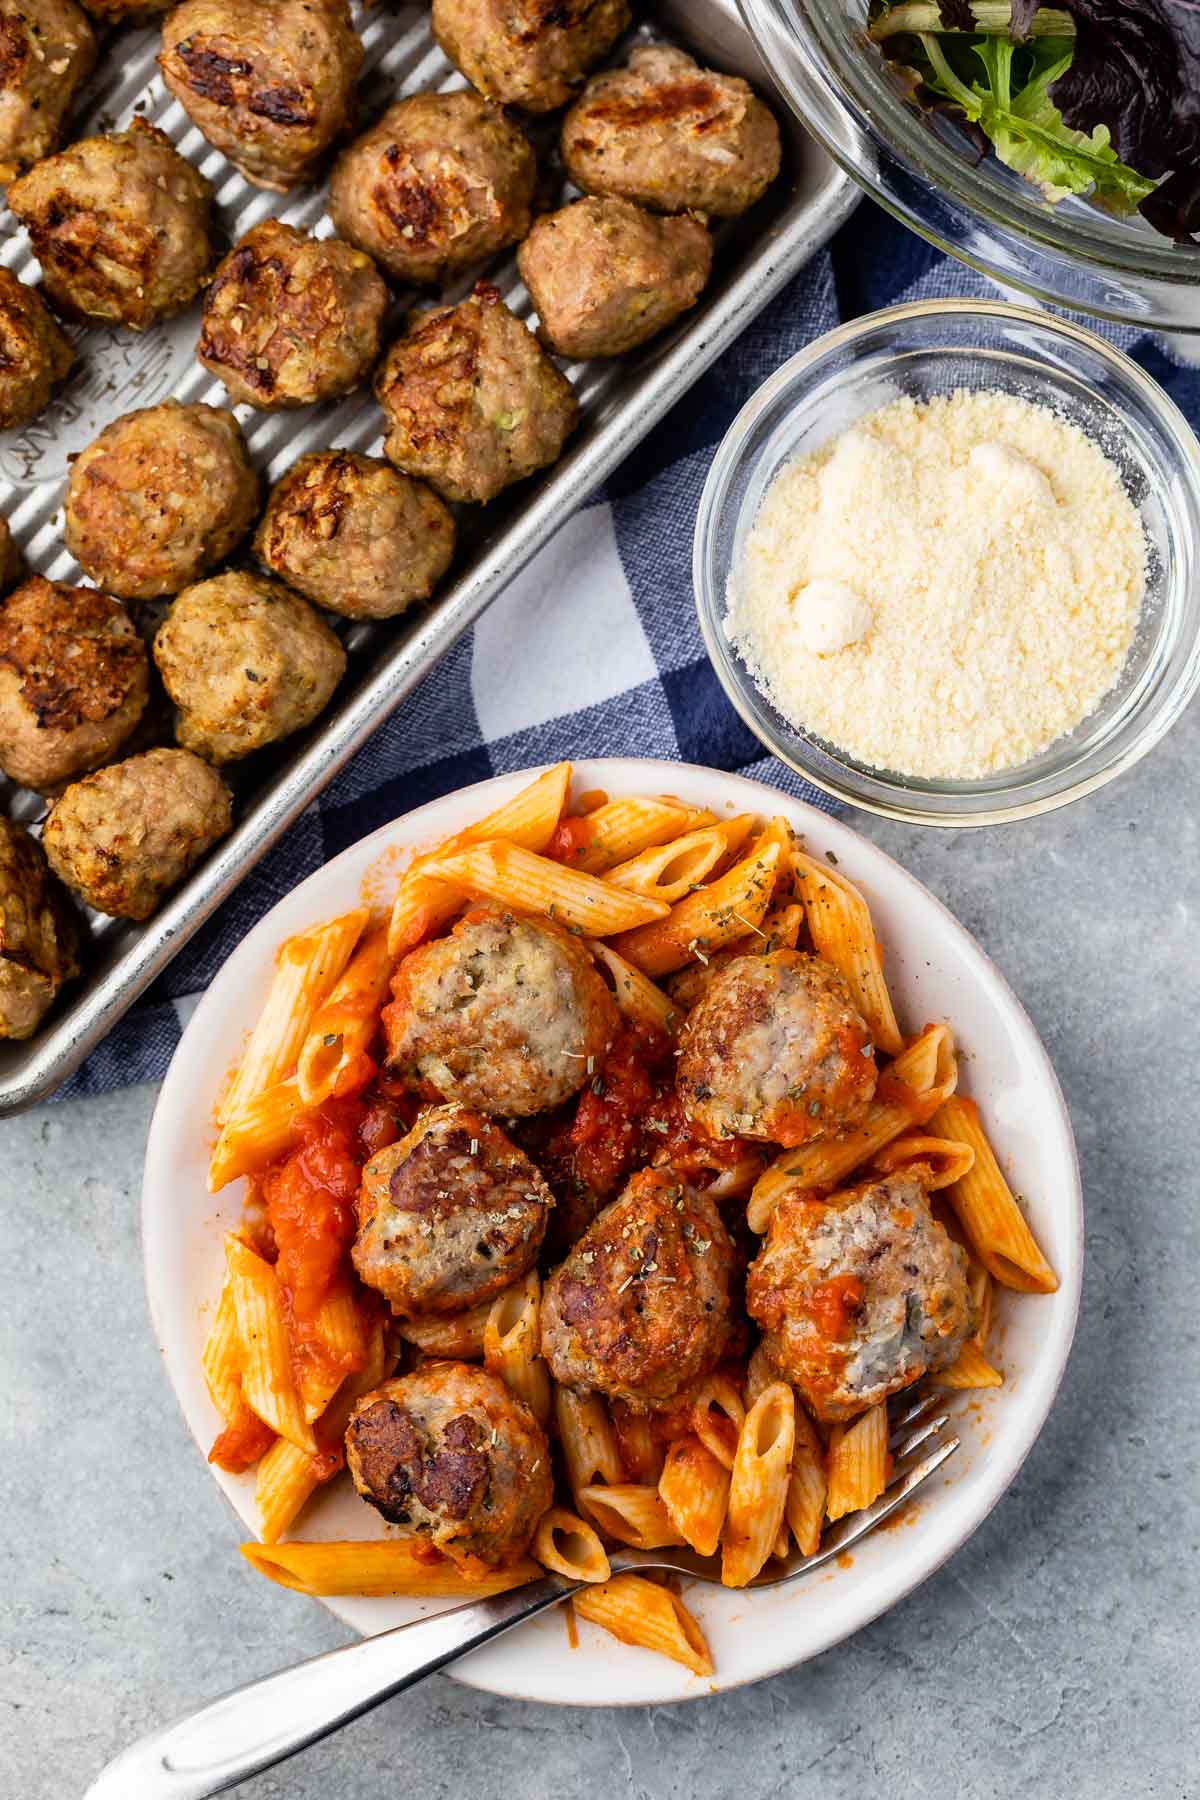 meatballs and pasta mixed together on a white plate.